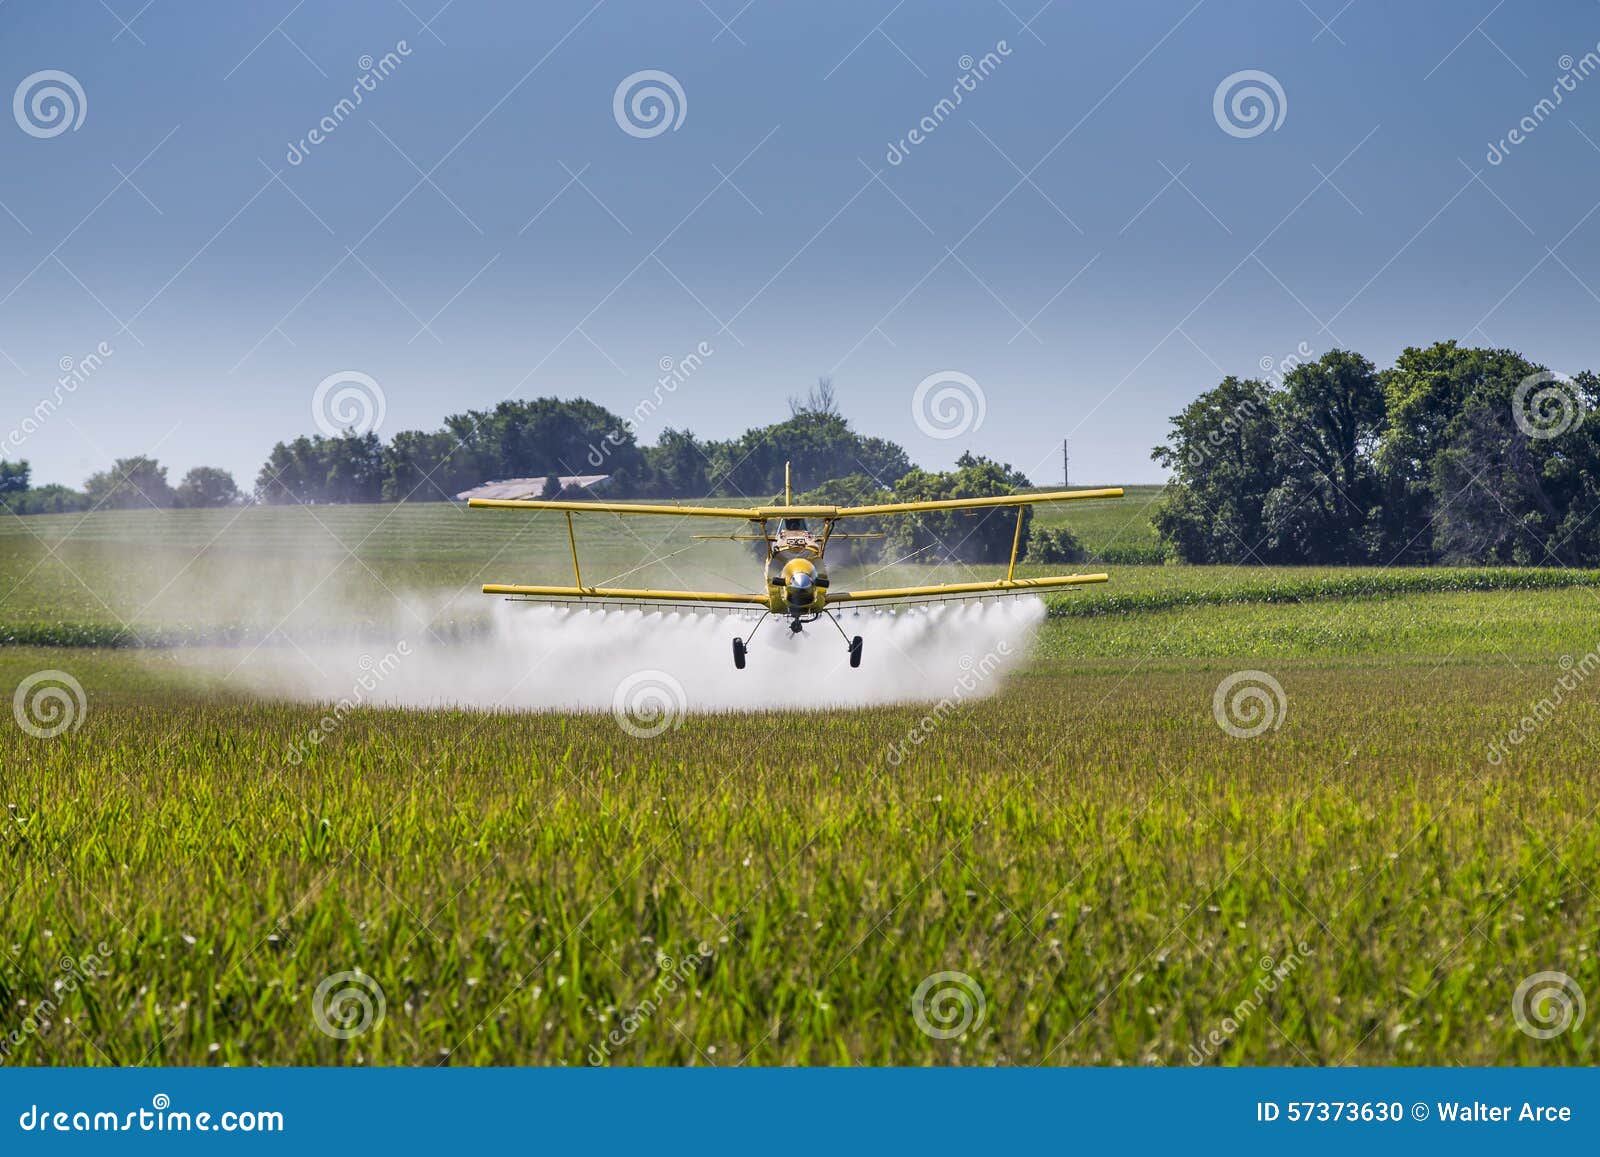 yellow crop duster